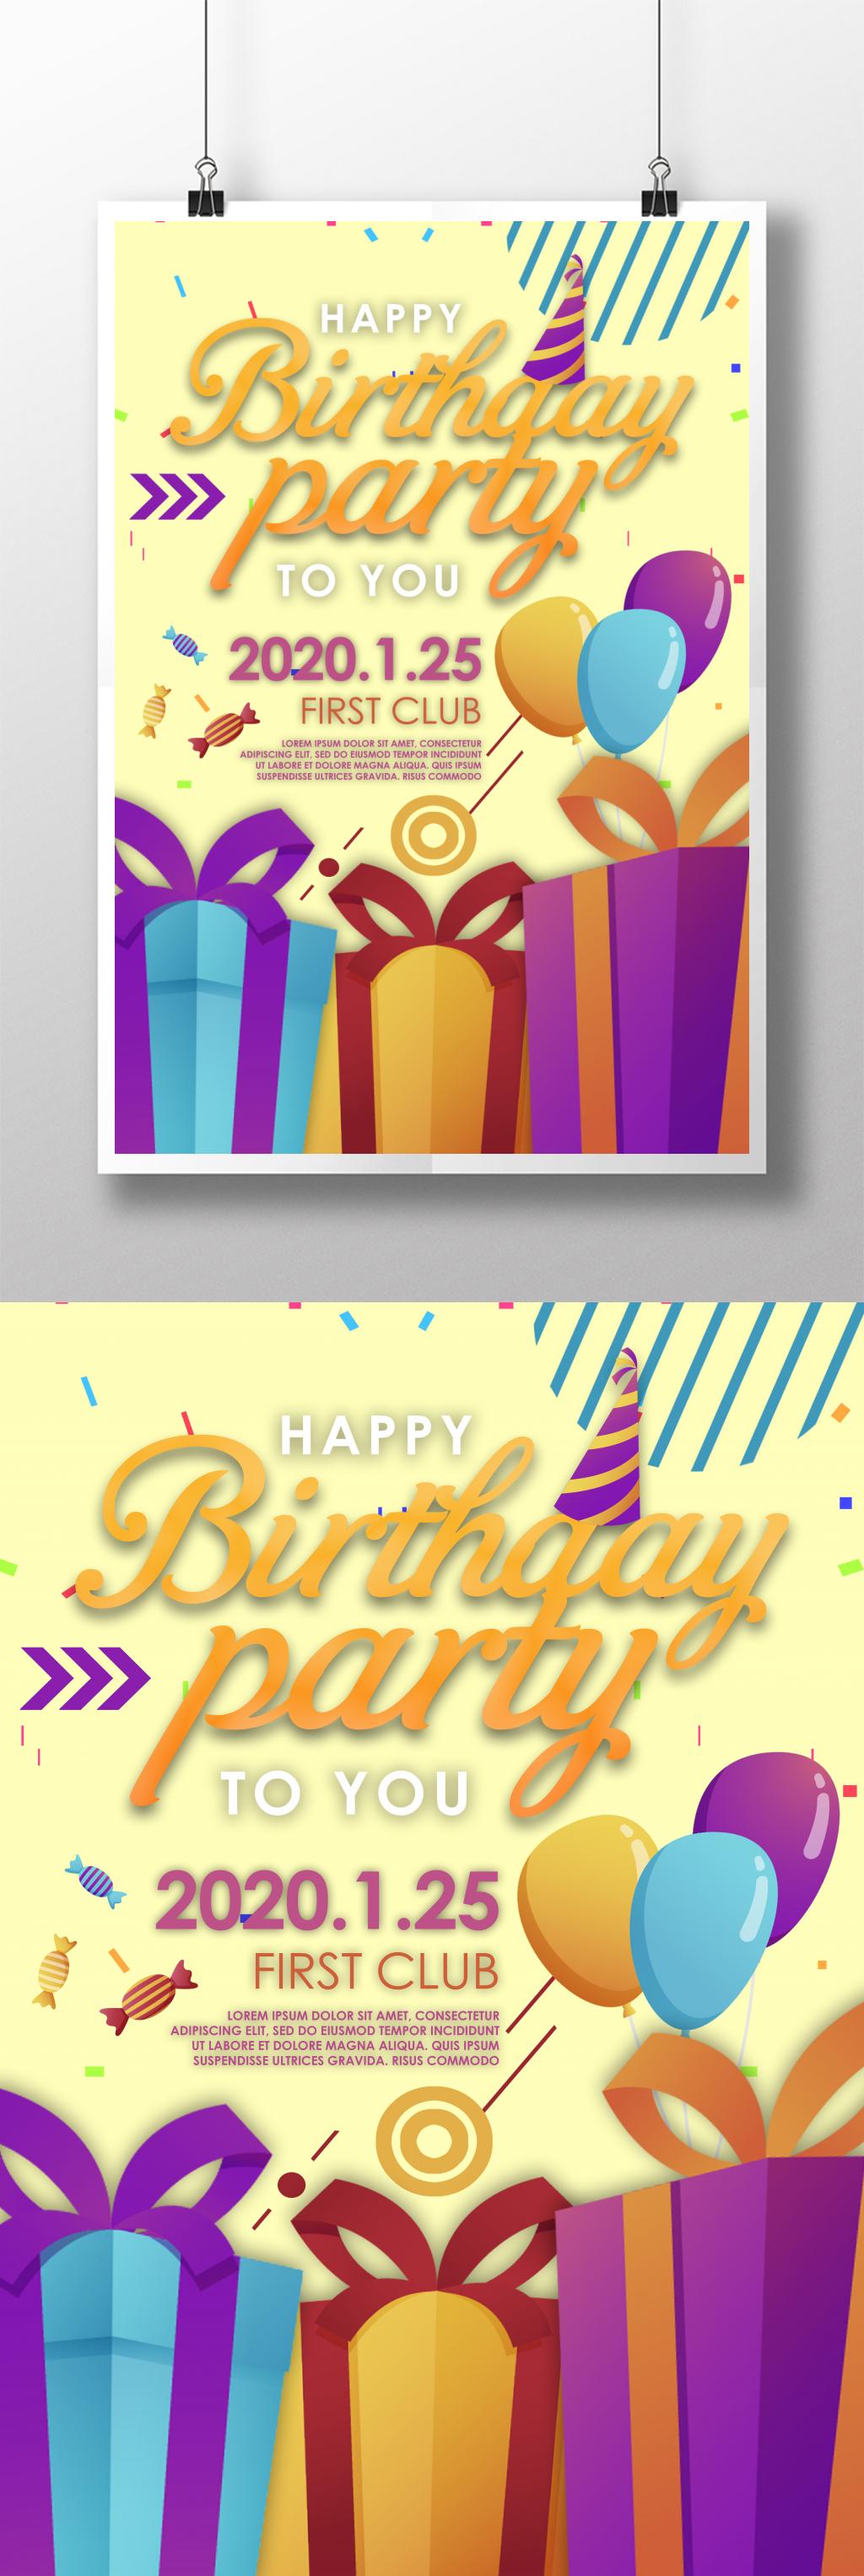 Free Party Poster Templates Photoshop